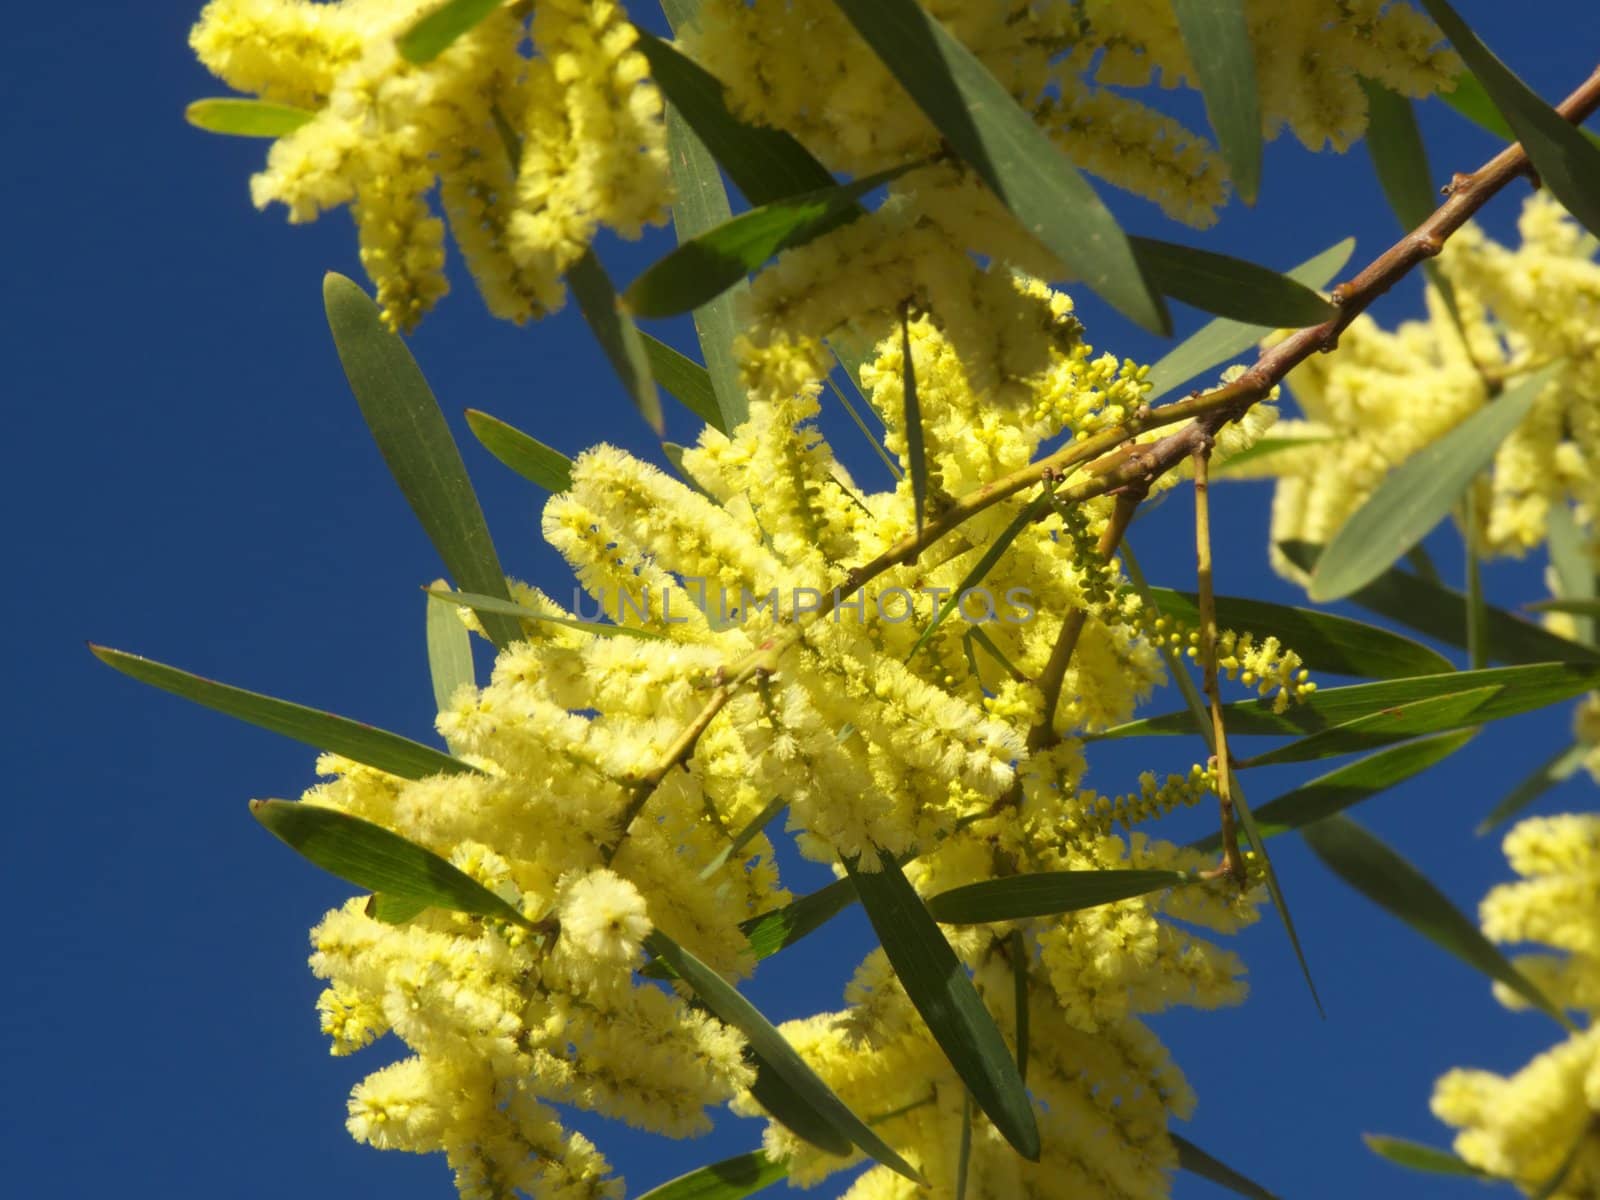 flowered mimosa branches by jbouzou